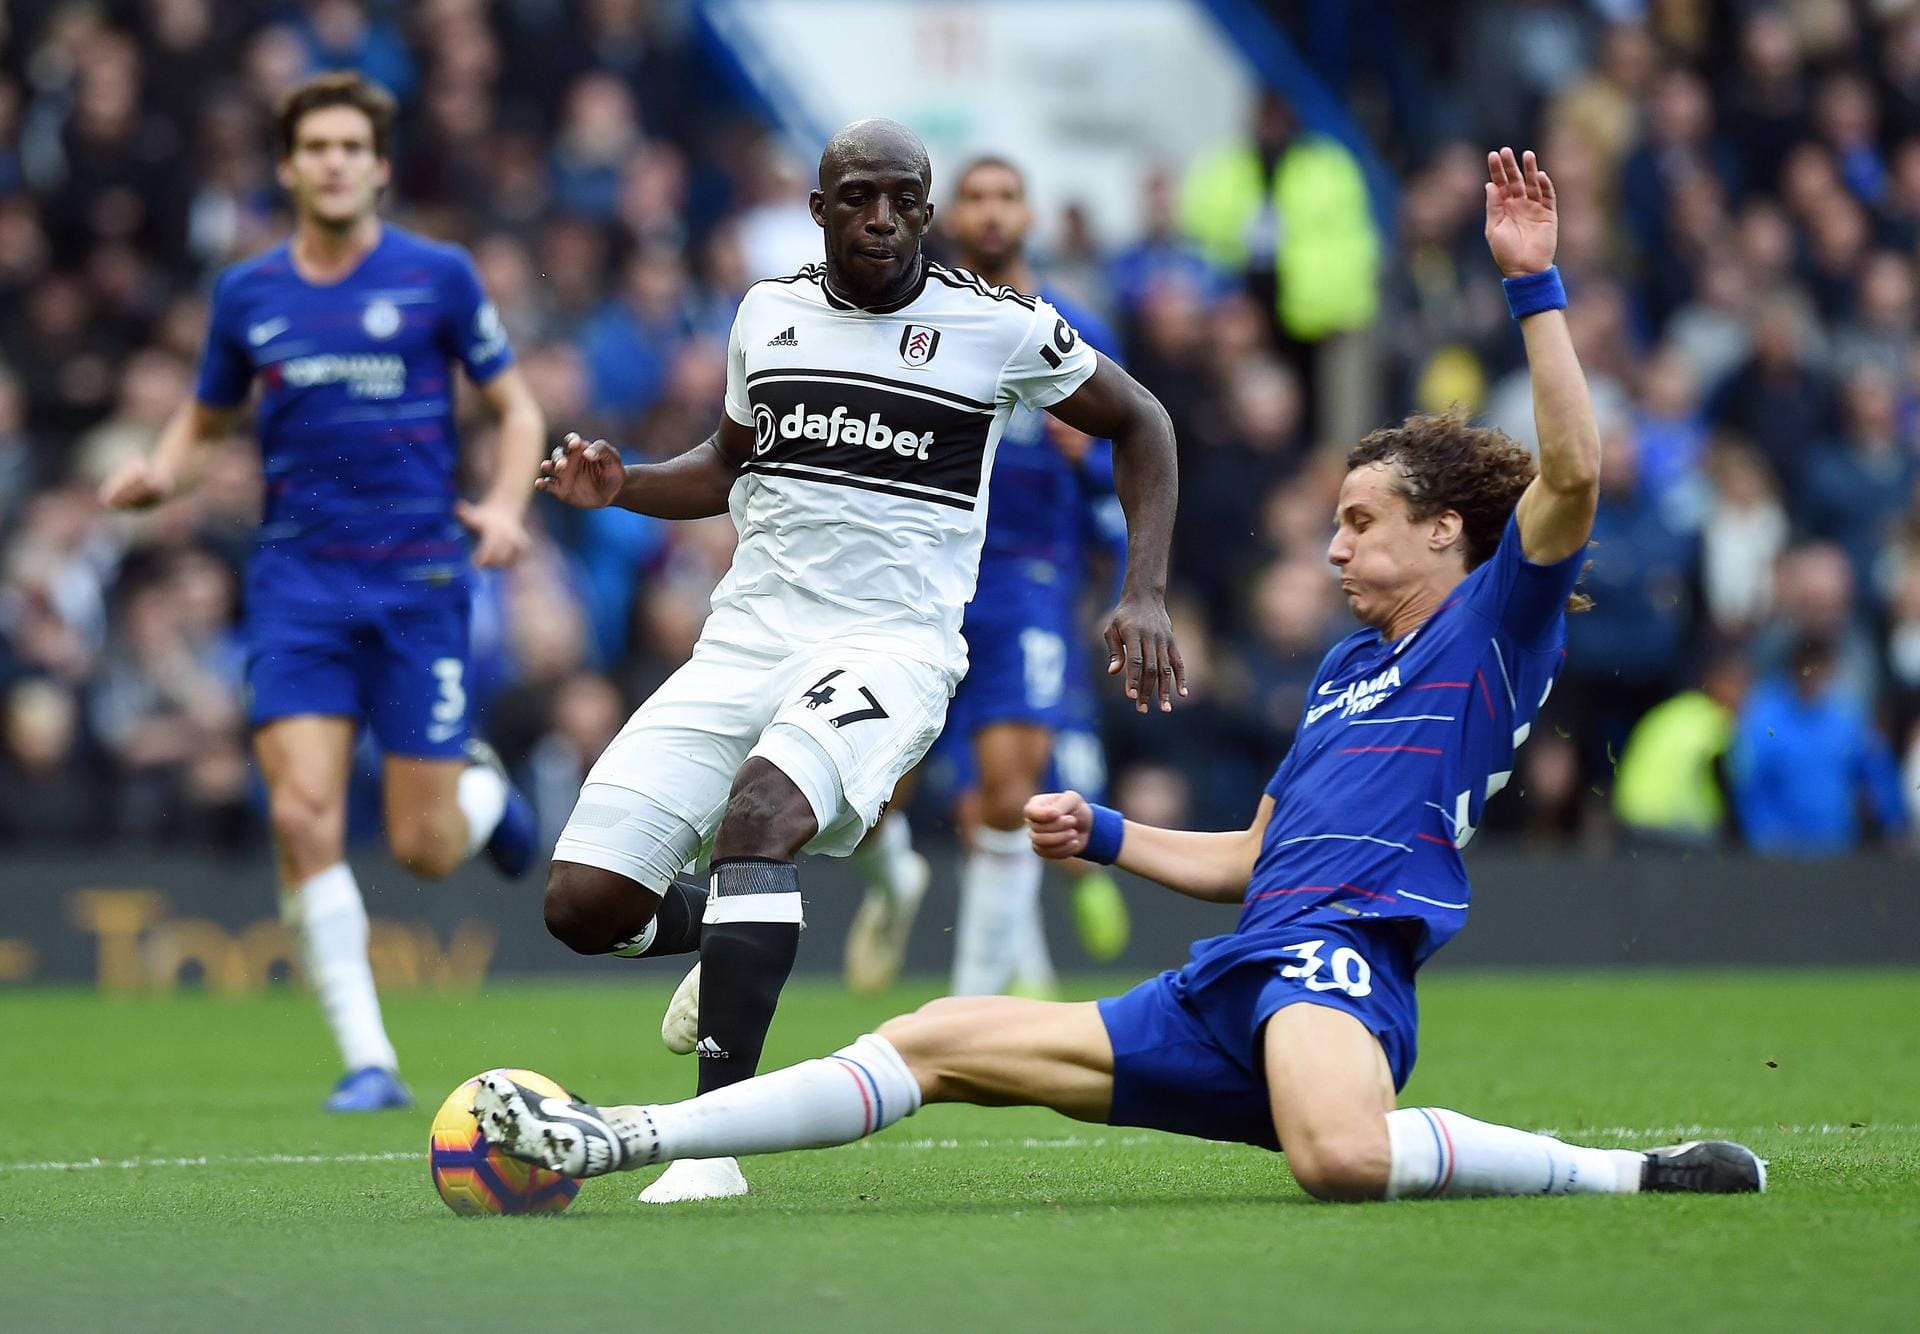 Aboubakar Kamara of Fulham is challenged by David Luiz of Chelsea during the Premier League match at